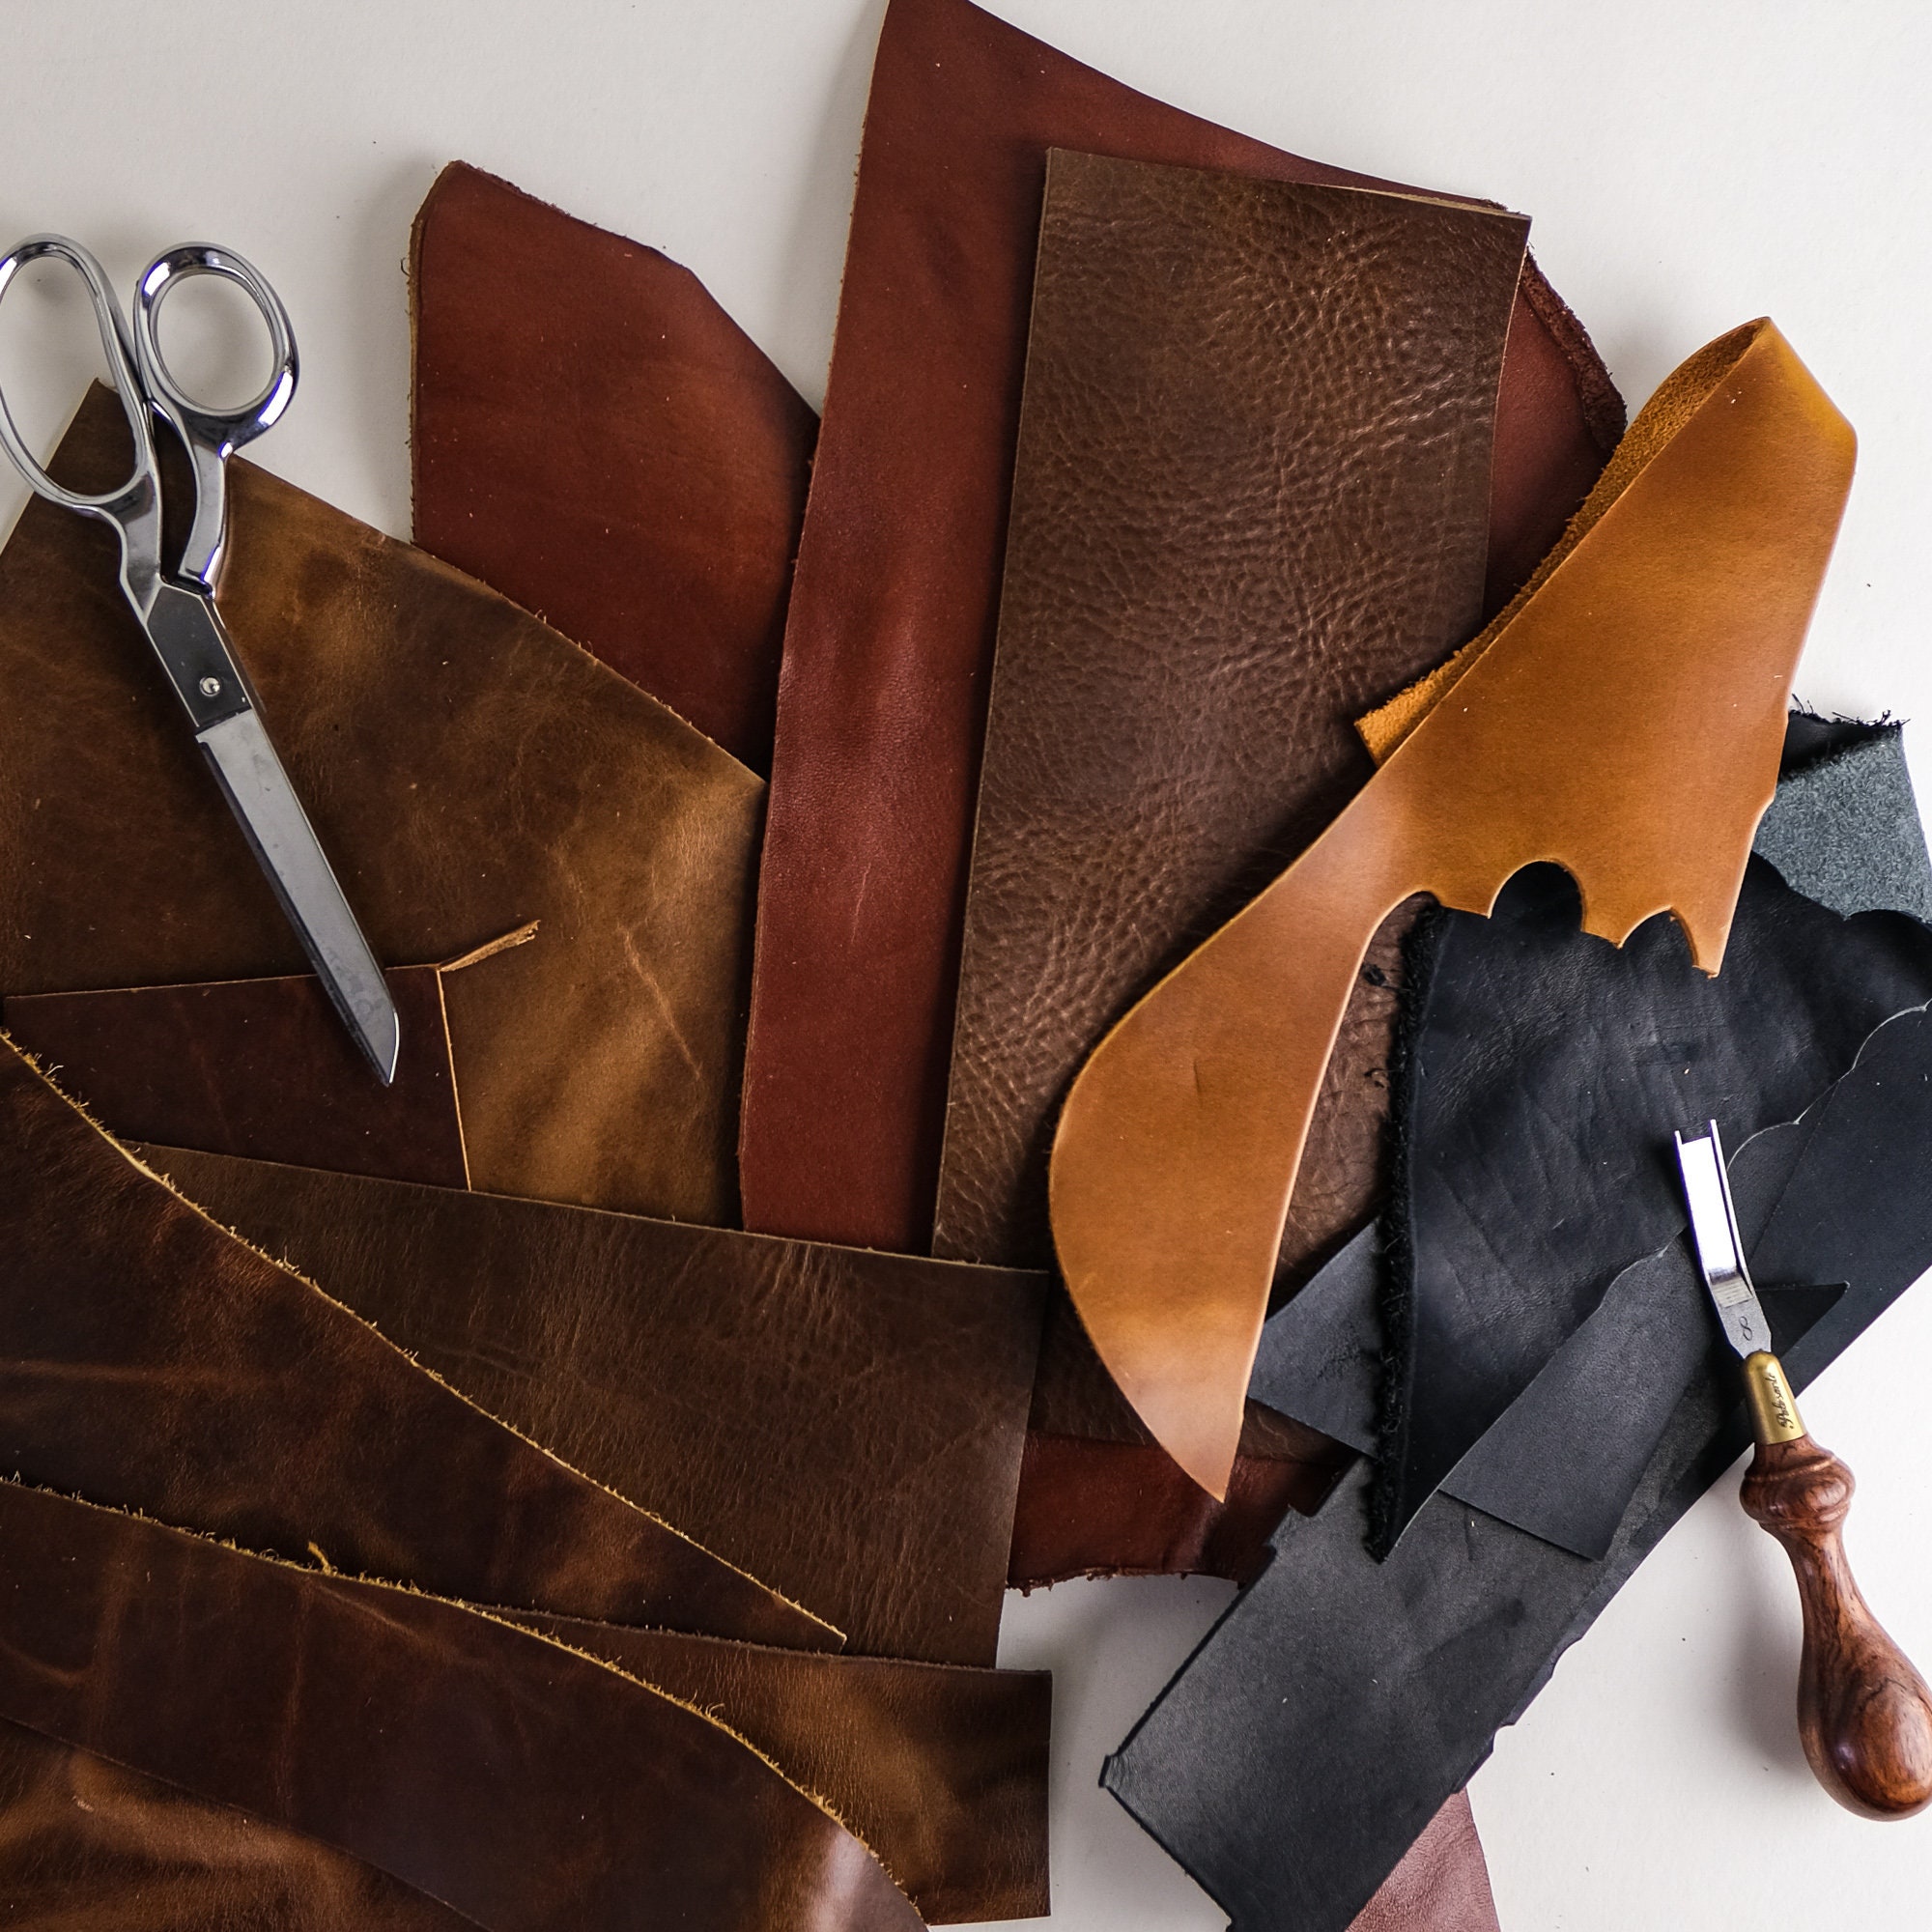 Upholstery Leather Scraps for small crafts 1 - 2 Hands